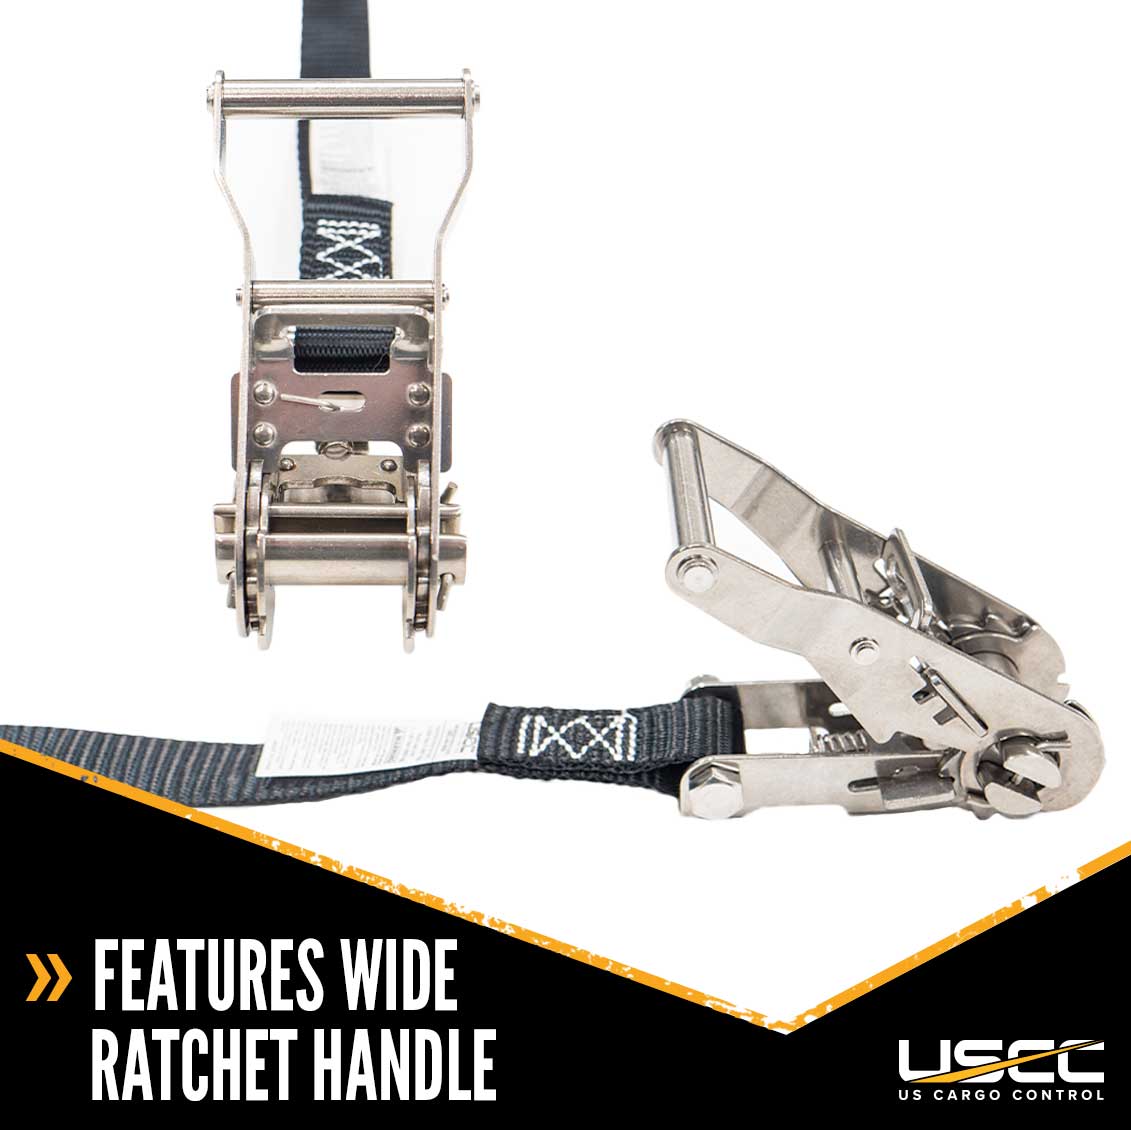 1" x 15' Black Stainless Steel Endless Ratchet Strap